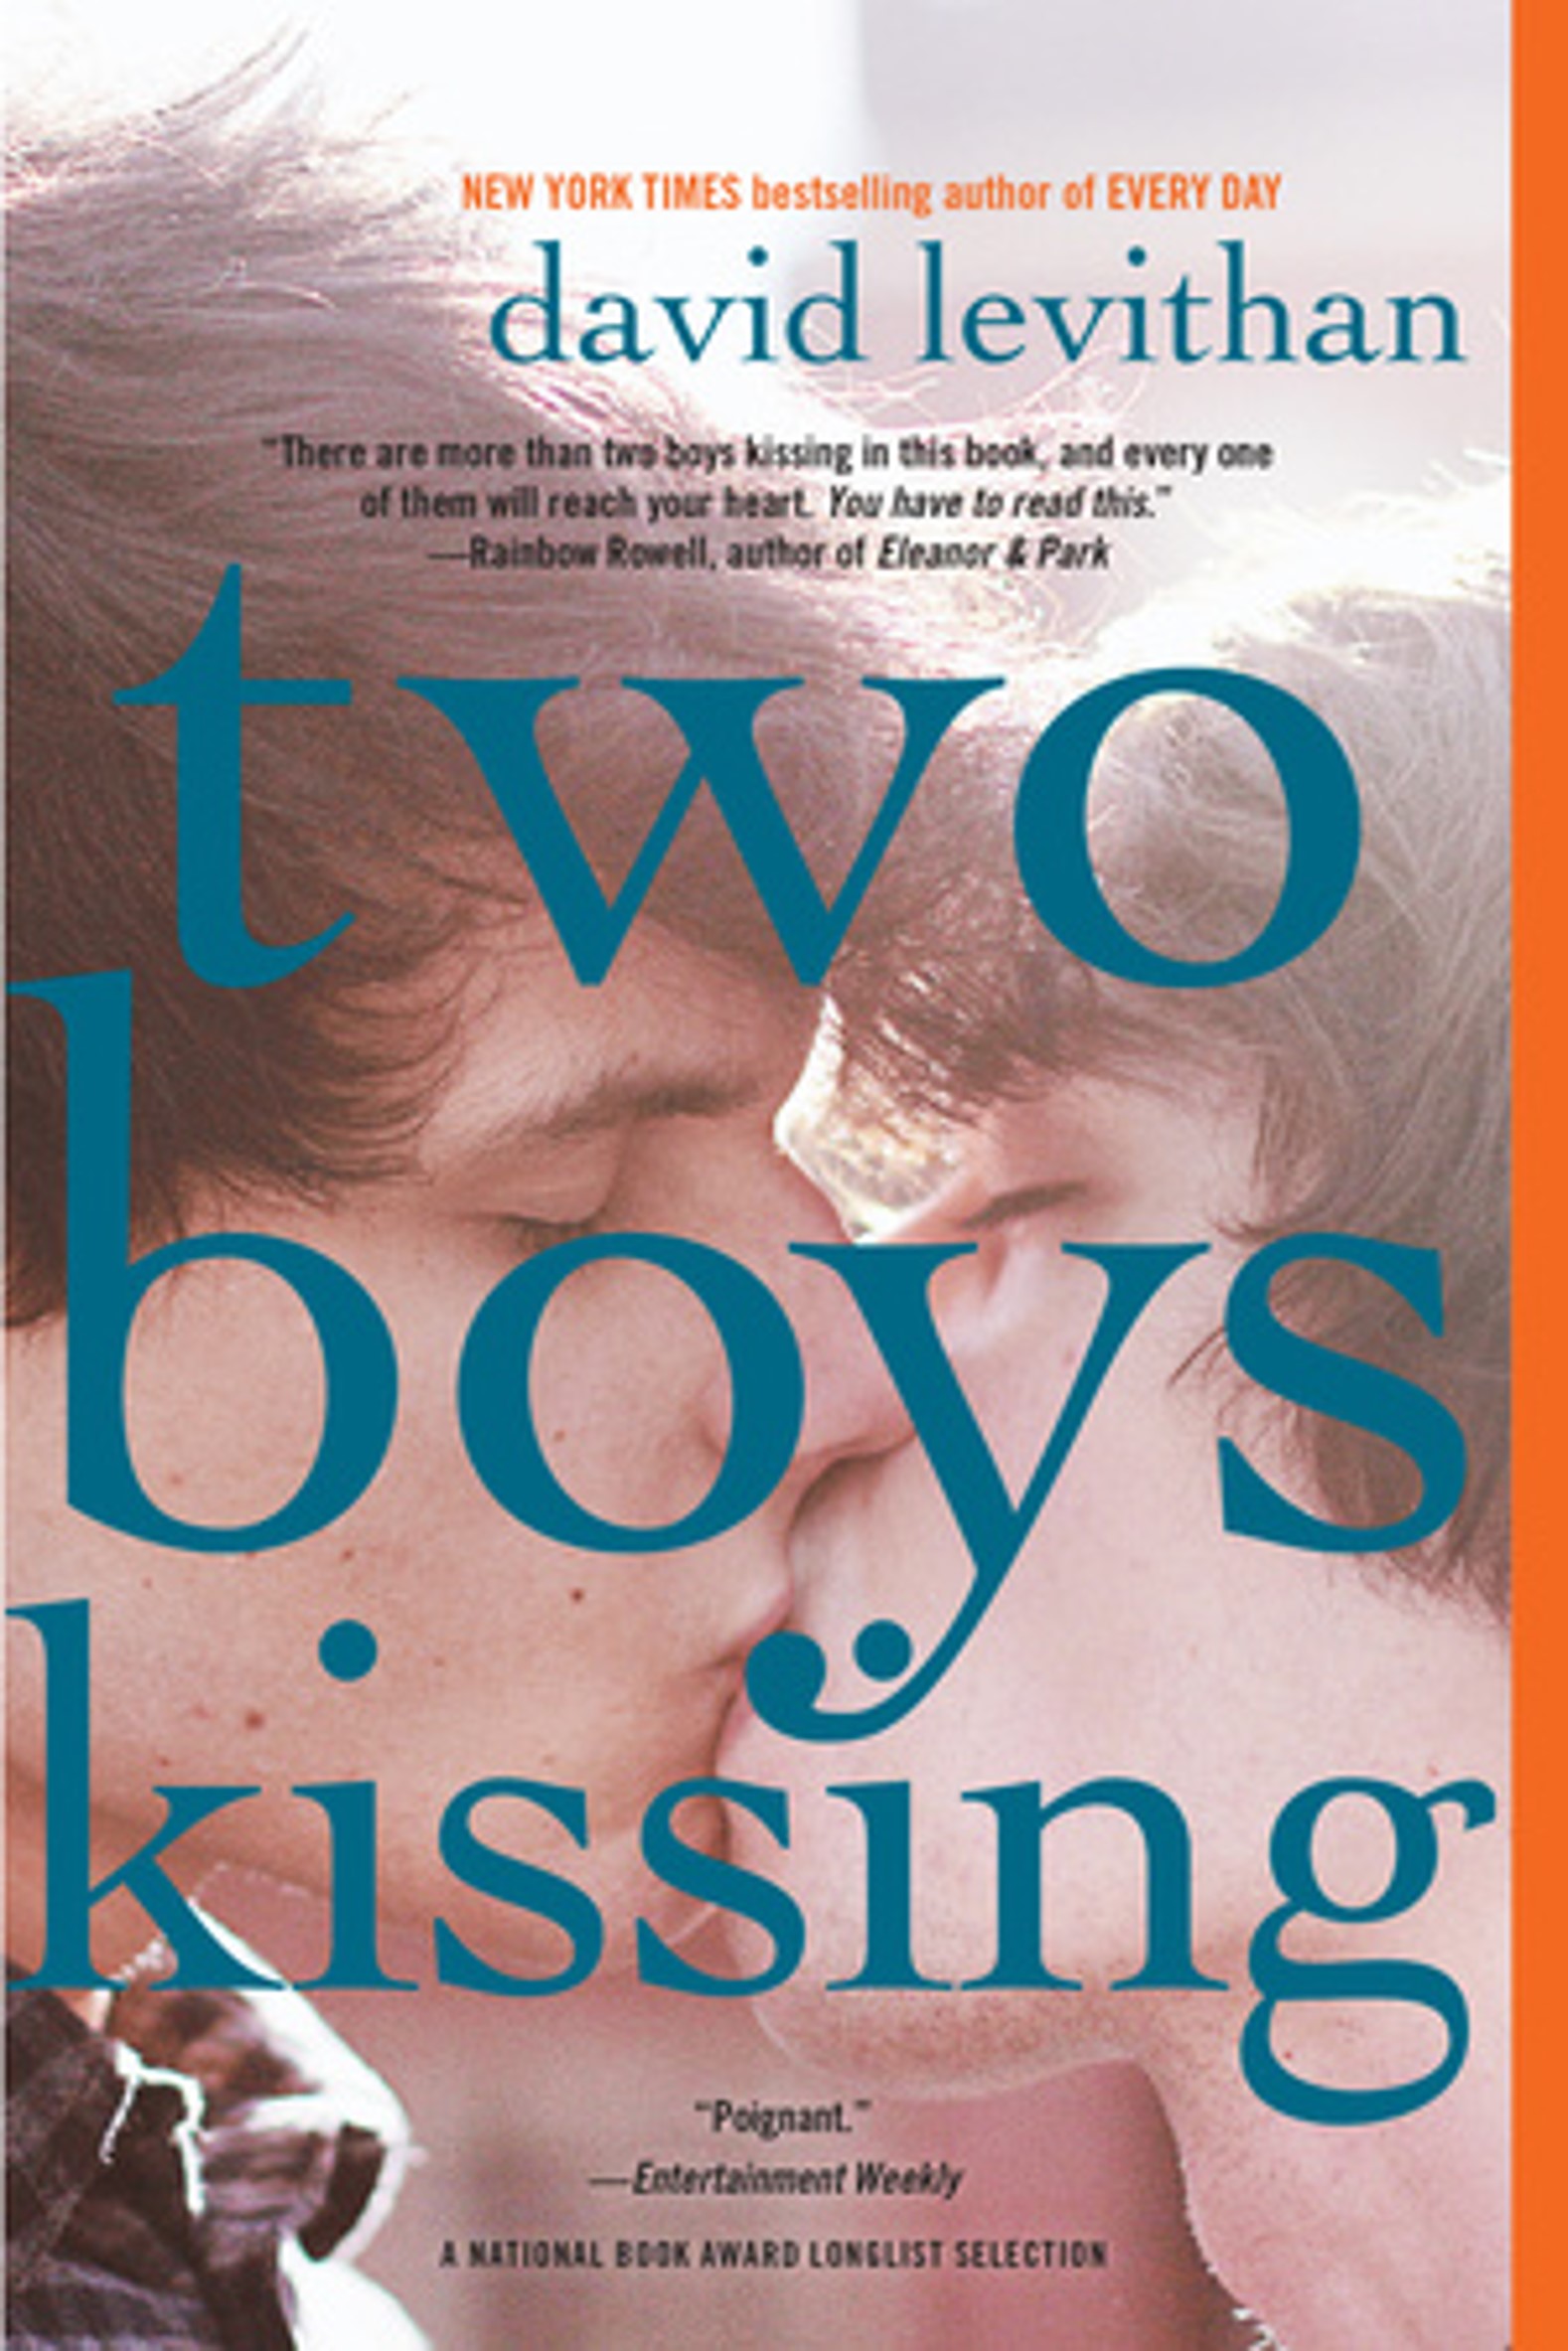 Book cover of Two Boys Kissing.